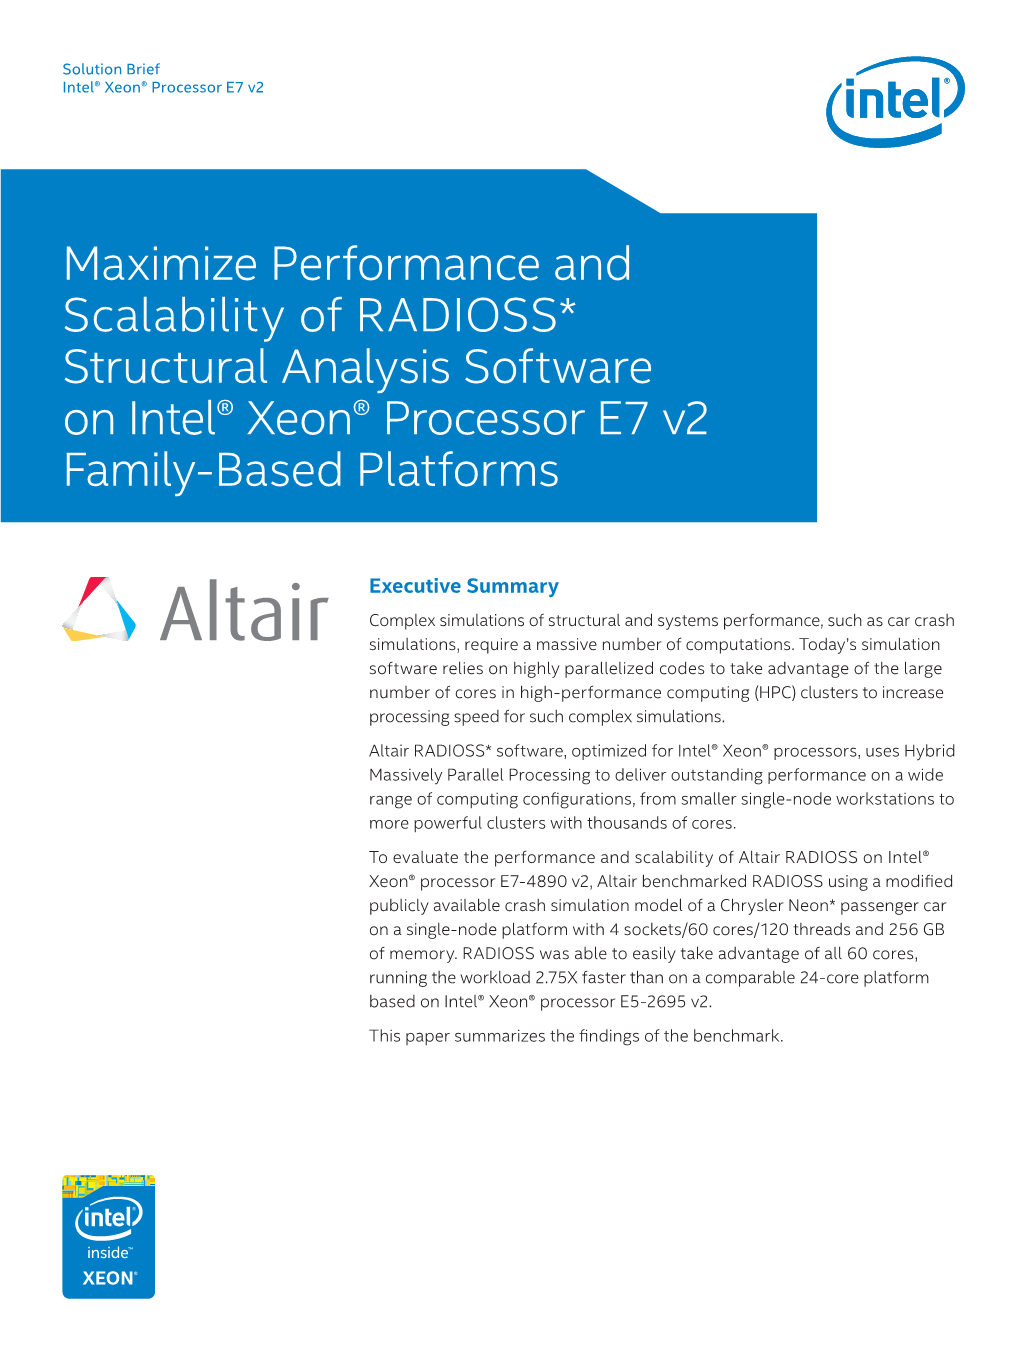 Maximize Performance and Scalability of RADIOSS* Structural Analysis Software on Intel® Xeon® Processor E7 V2 Family-Based Platforms